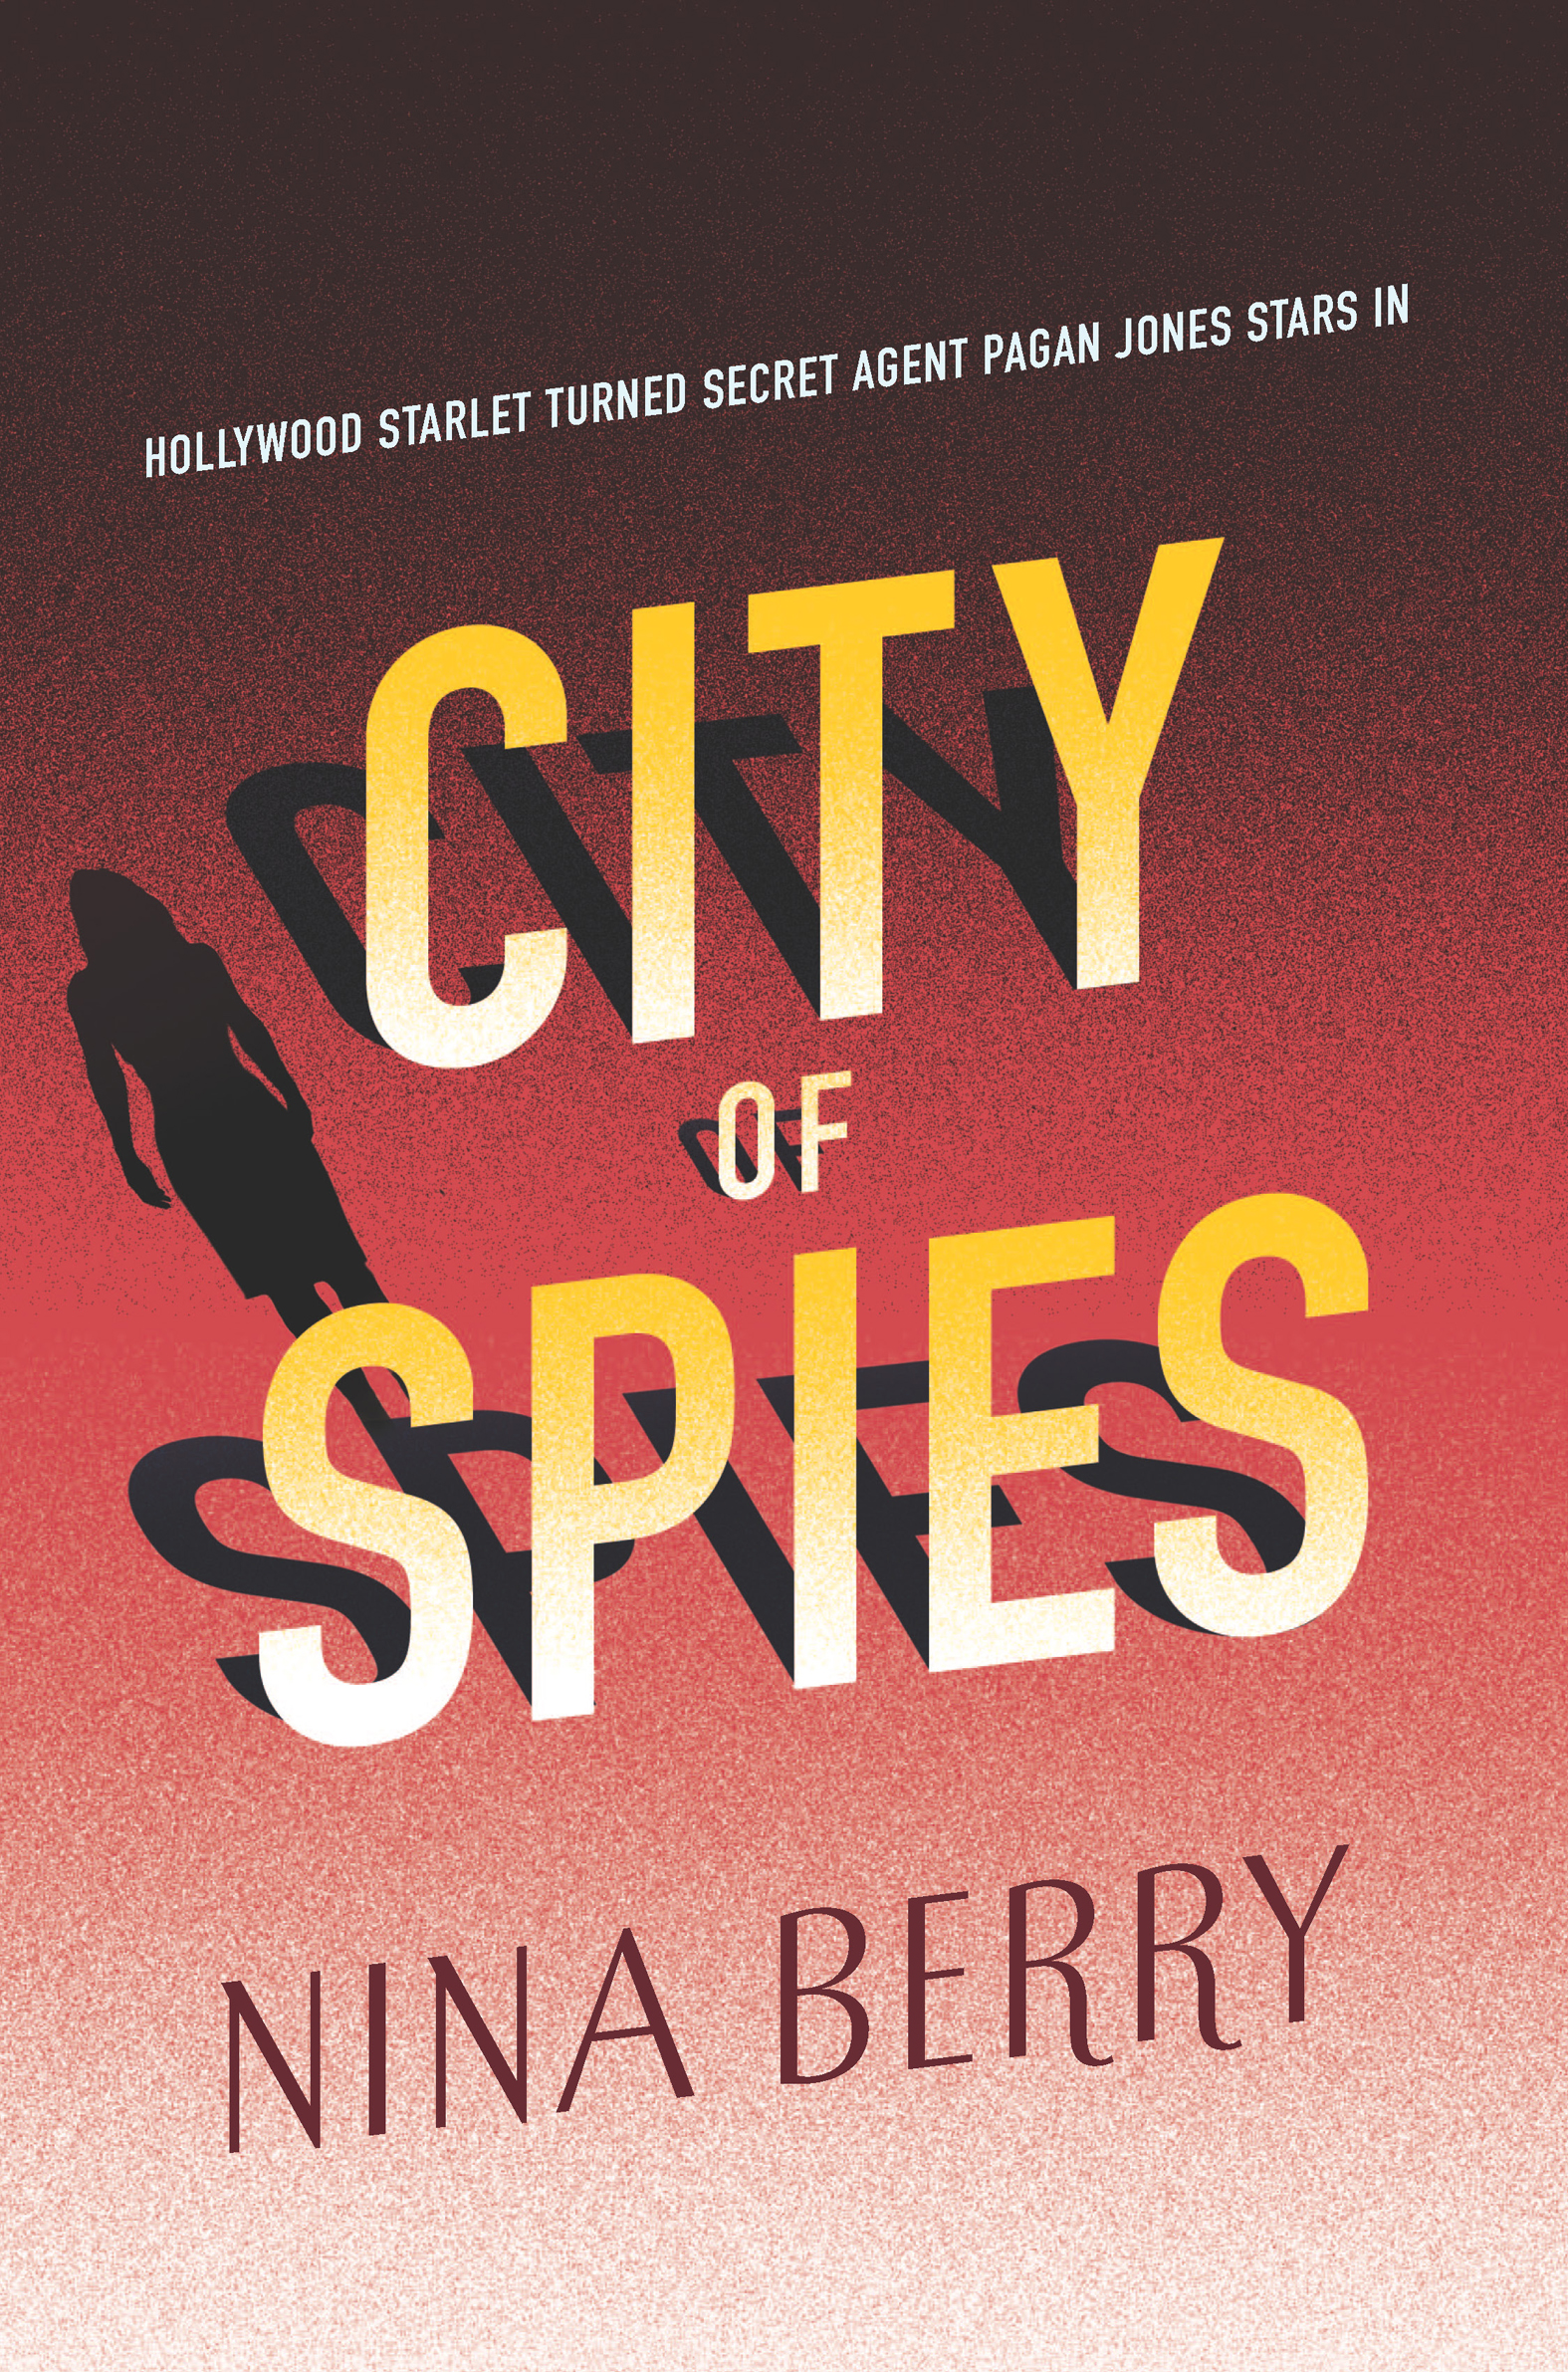 City of Spies (2016) by Nina Berry